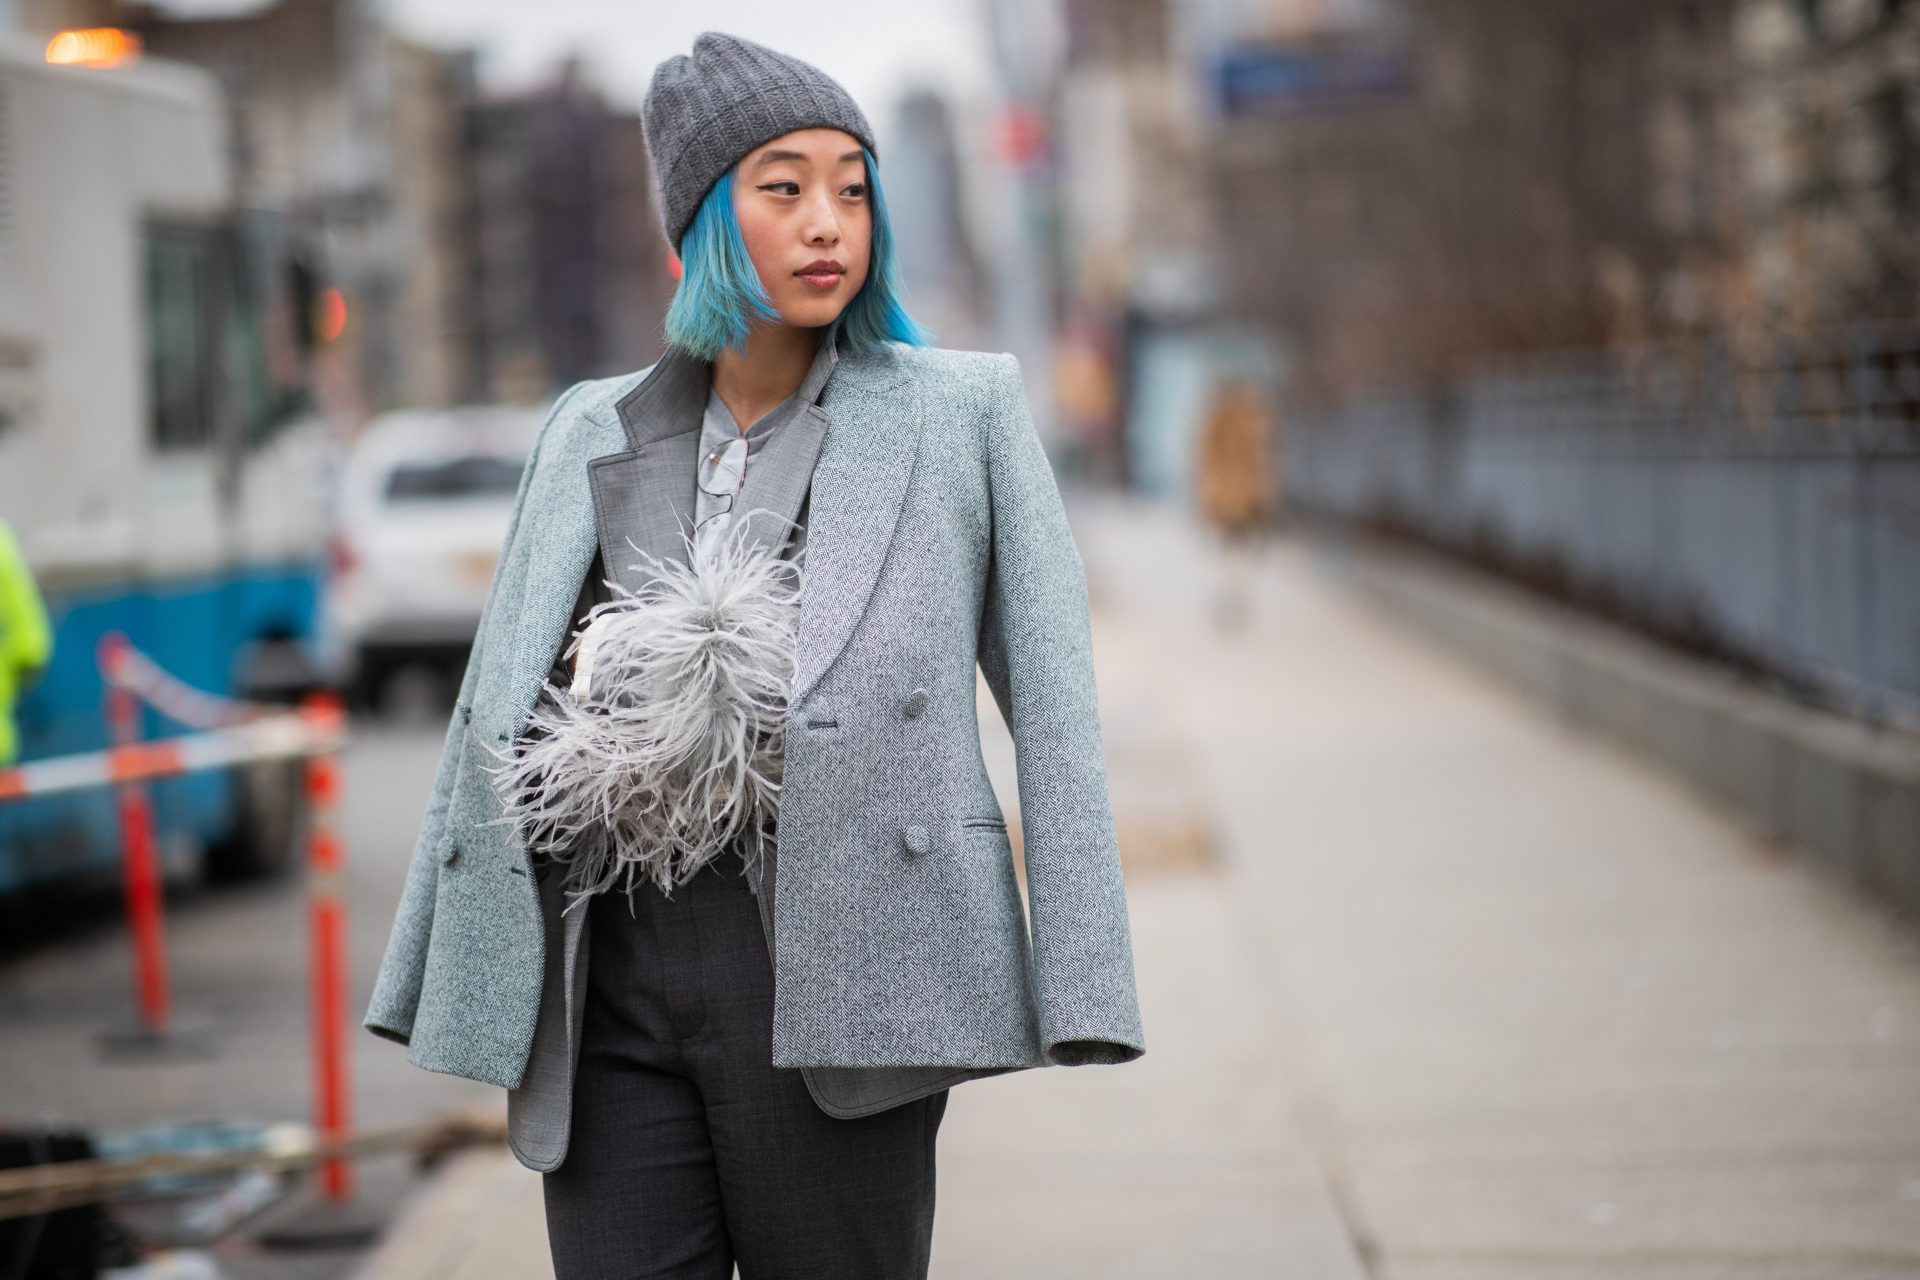 47 Frigid Contemporary Ways to Wear Your Hair This Iciness